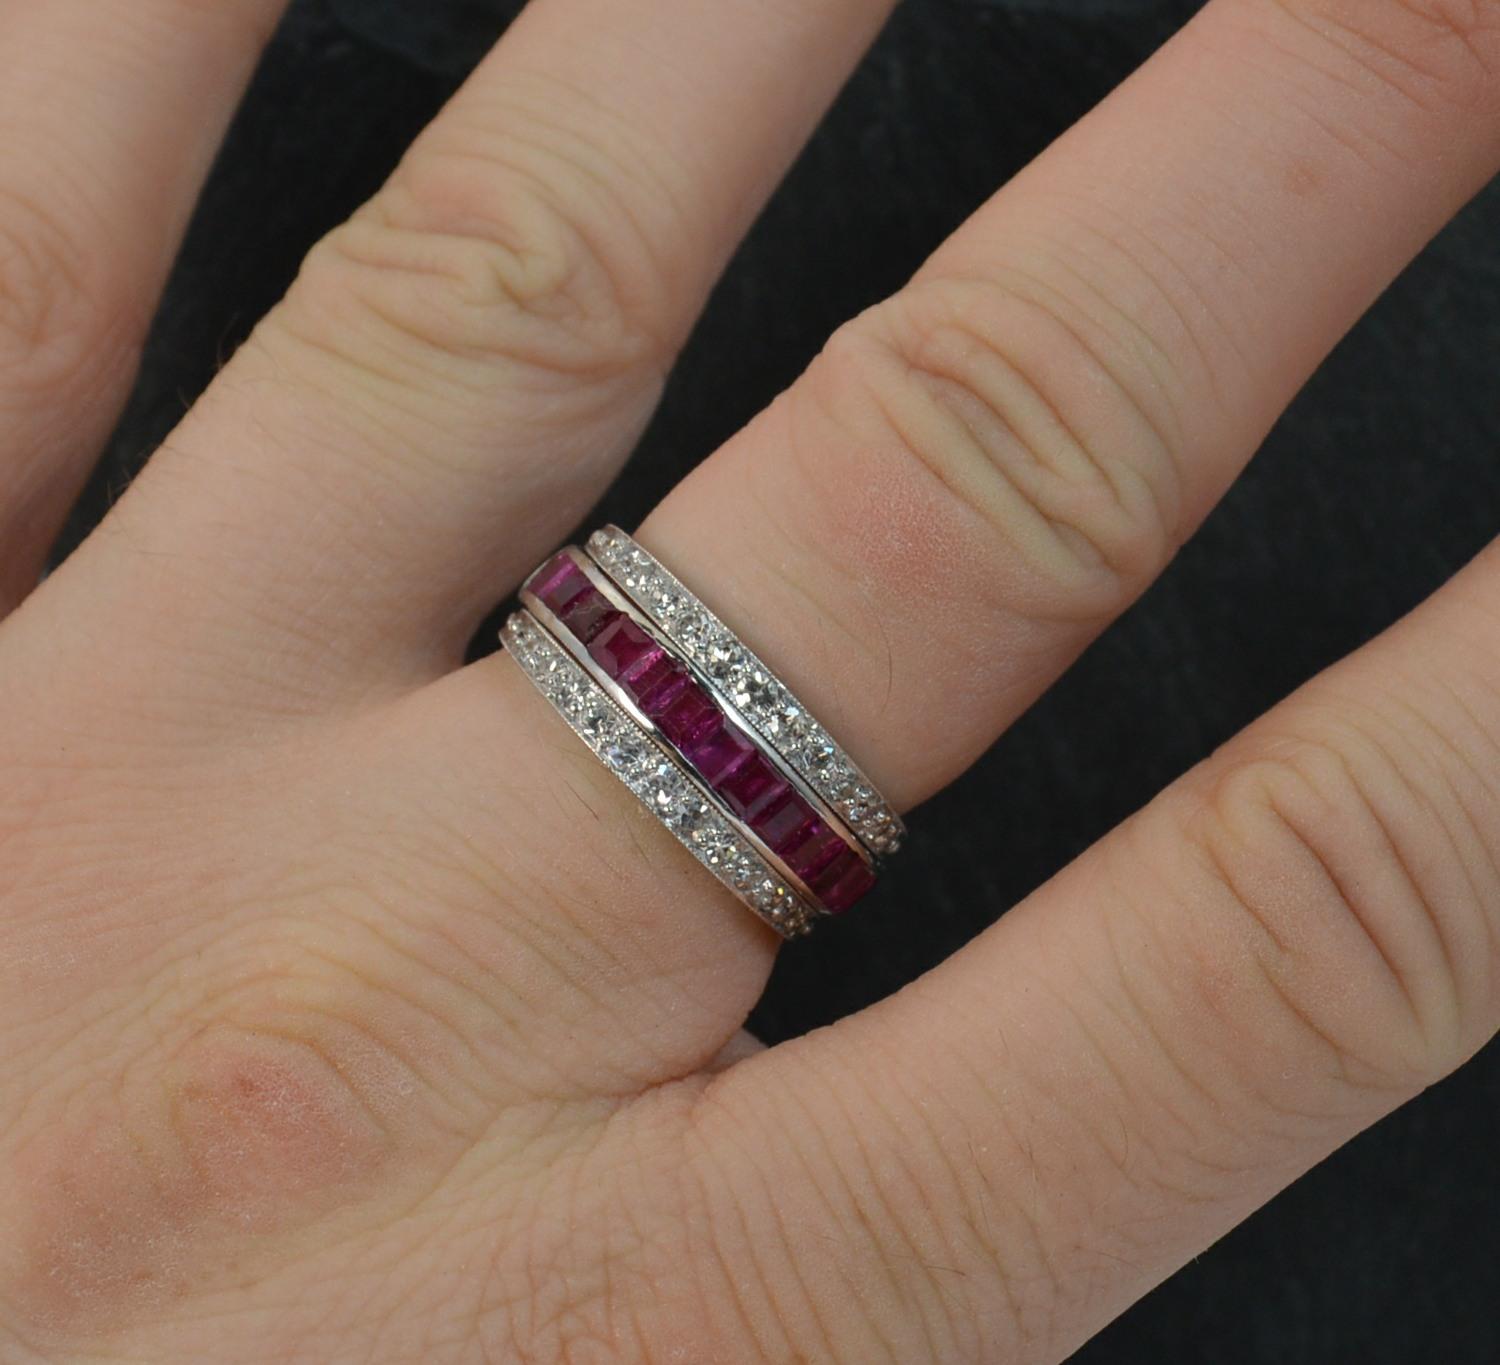 A stunning Day / Night ring c1940.
SIZE ; N UK, 6 3/4 US
Solid 18 carat white gold example.
Designed with the central band of princess cut rubies to one half and plain gold the other. There are two hinged sections with round eight cut diamonds, one